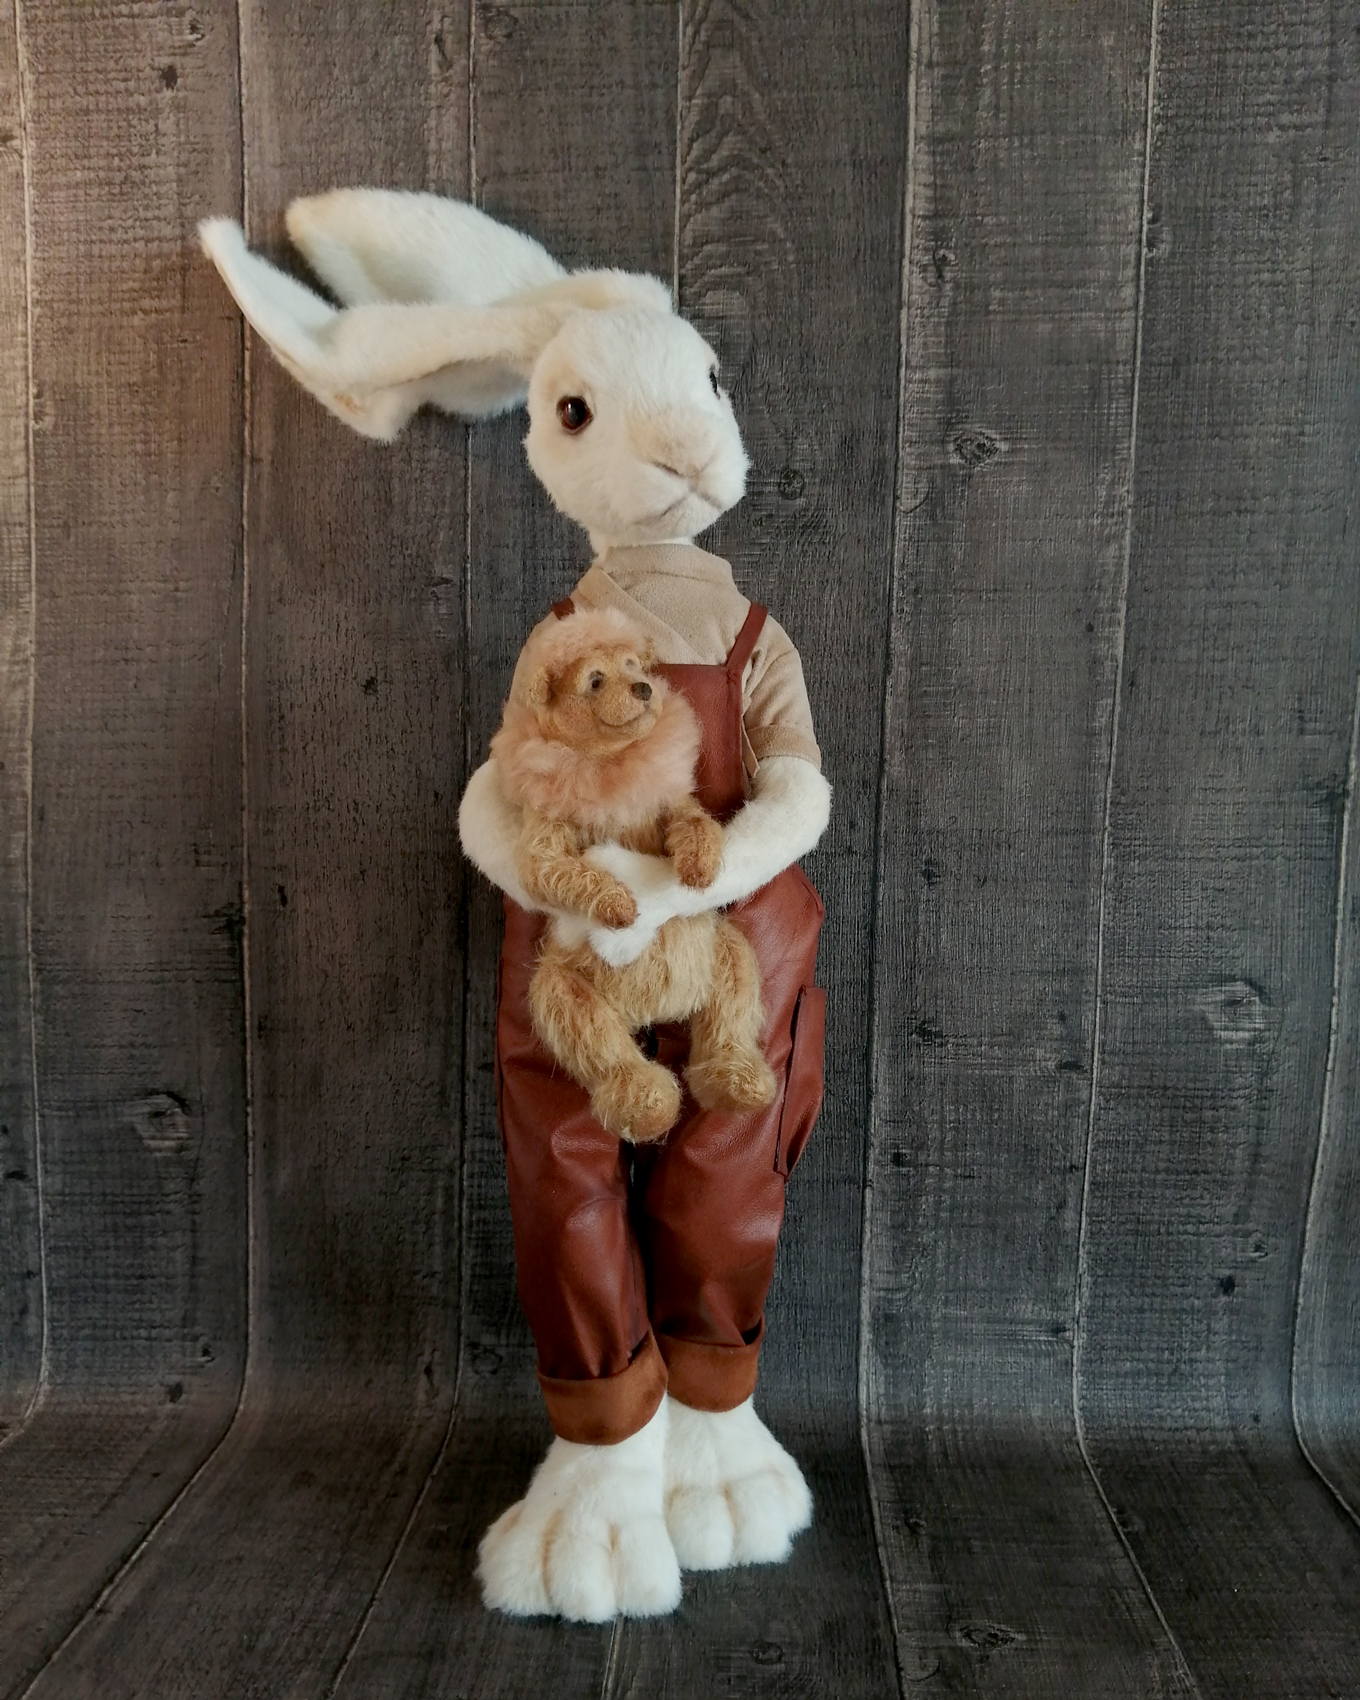 Toy hare with a dog